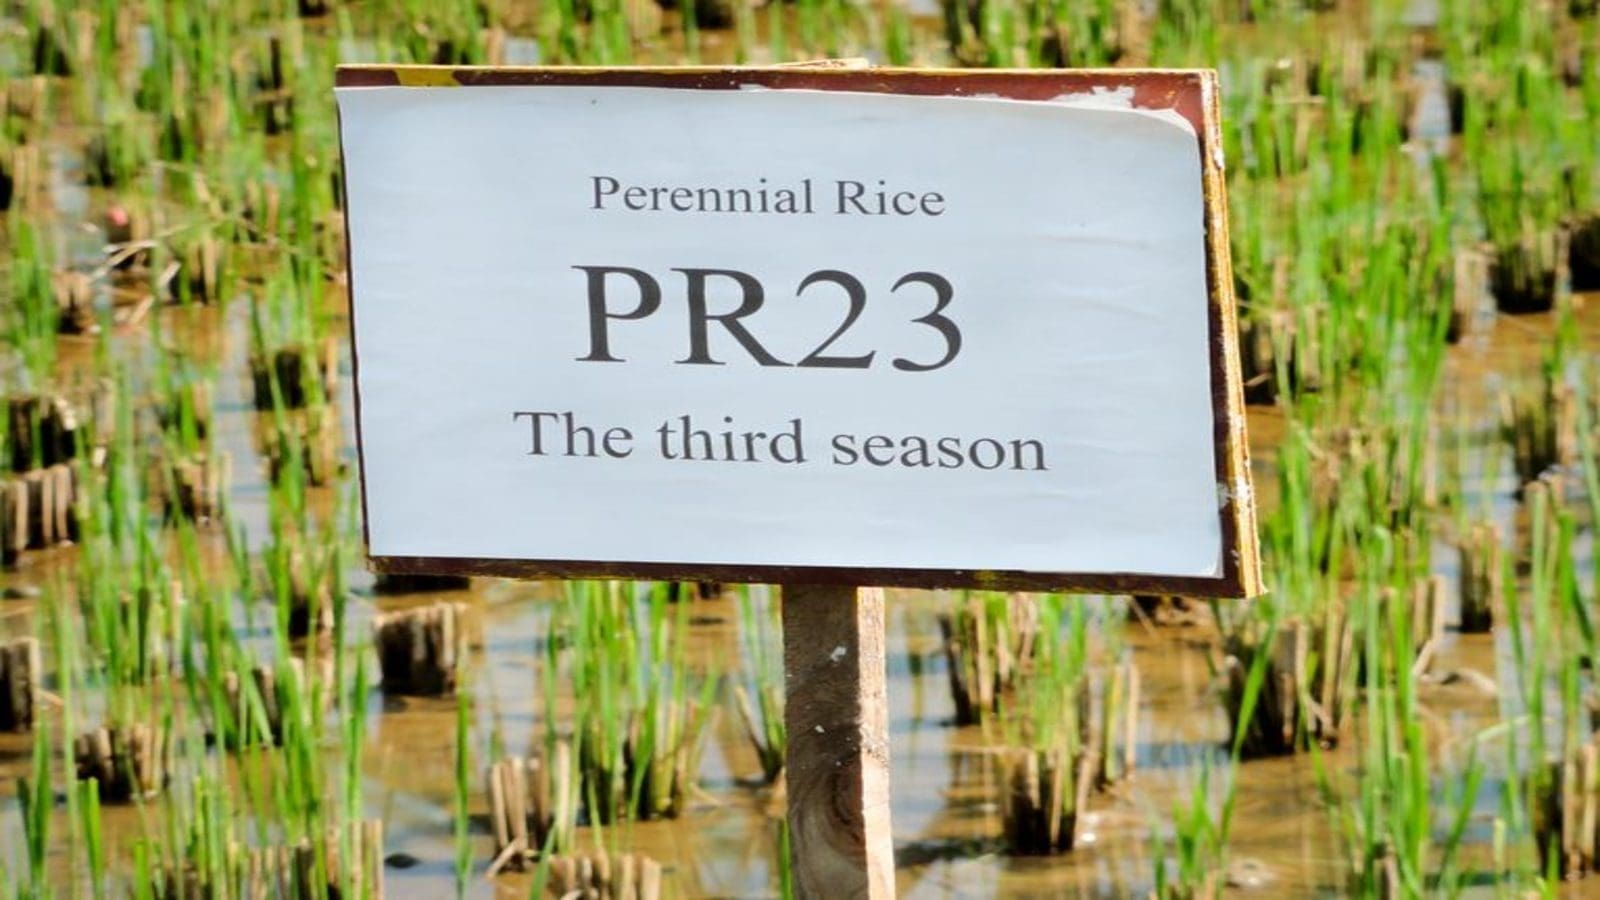 <strong>Researchers develop rice variety capable of regrowing season after season without reseeding</strong>